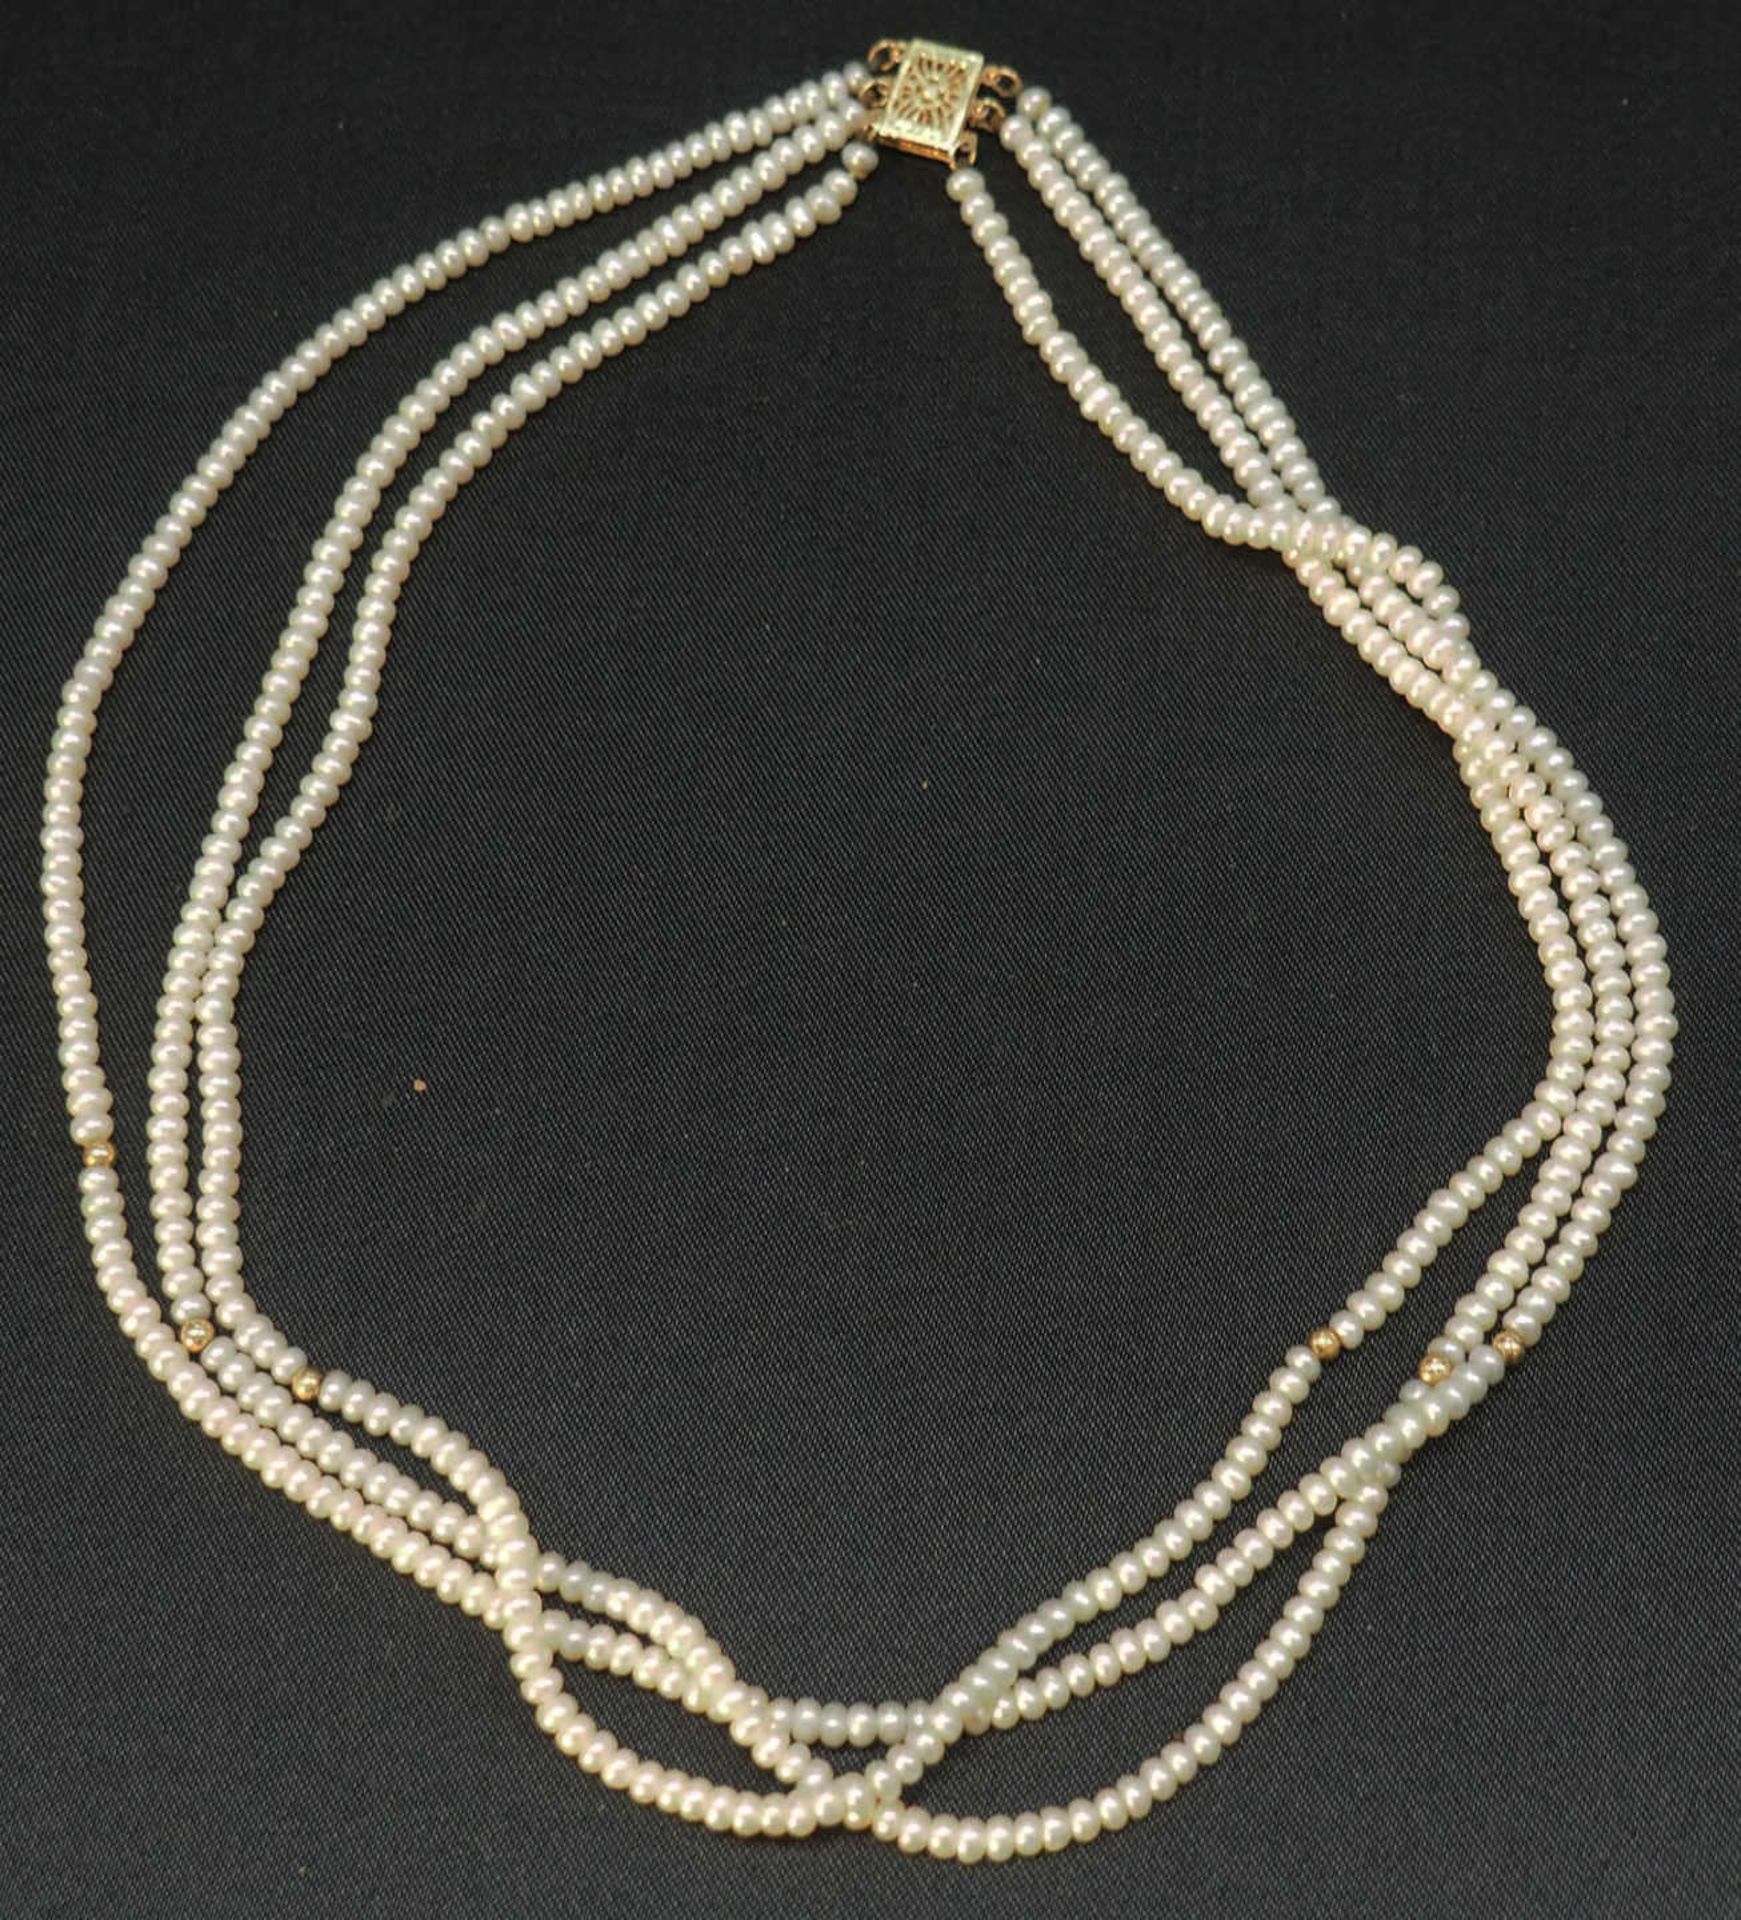 Very fine real pearl necklace with 585 yellow gold clasp, 3 rows.Sehr feine Echt-Perlenkette mit